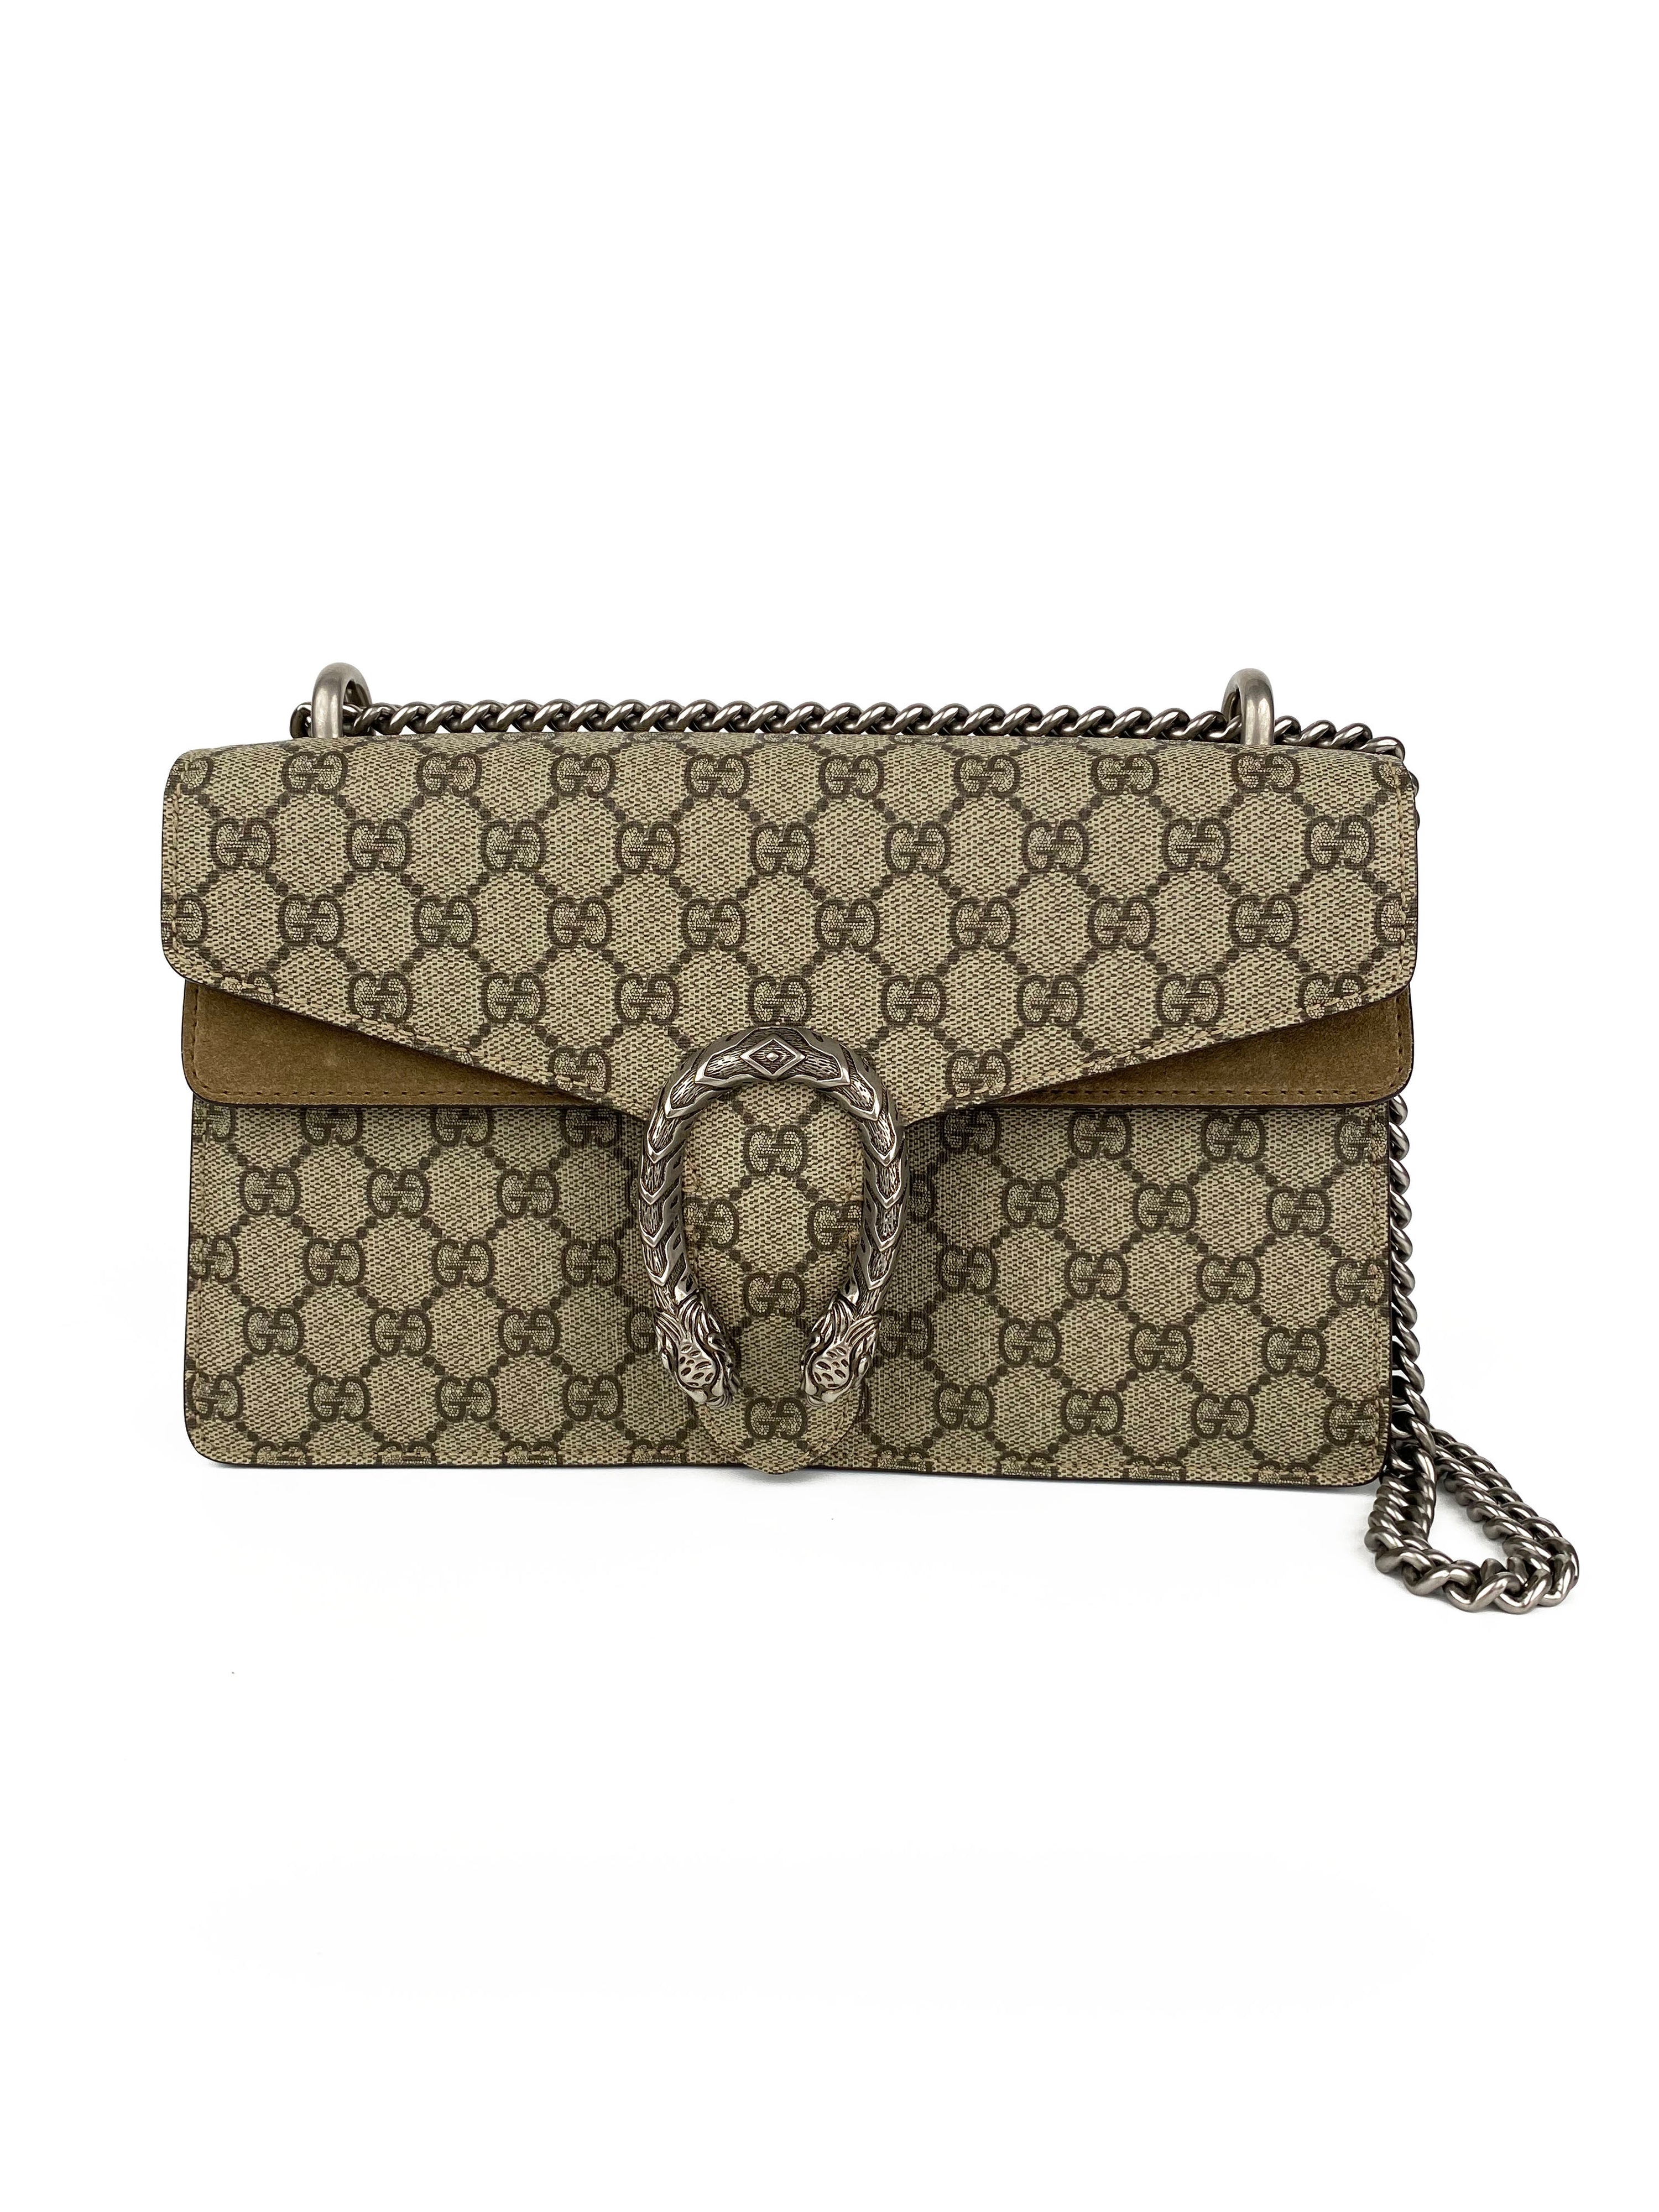 Gucci Small Dionysus Bag with Taupe Trim